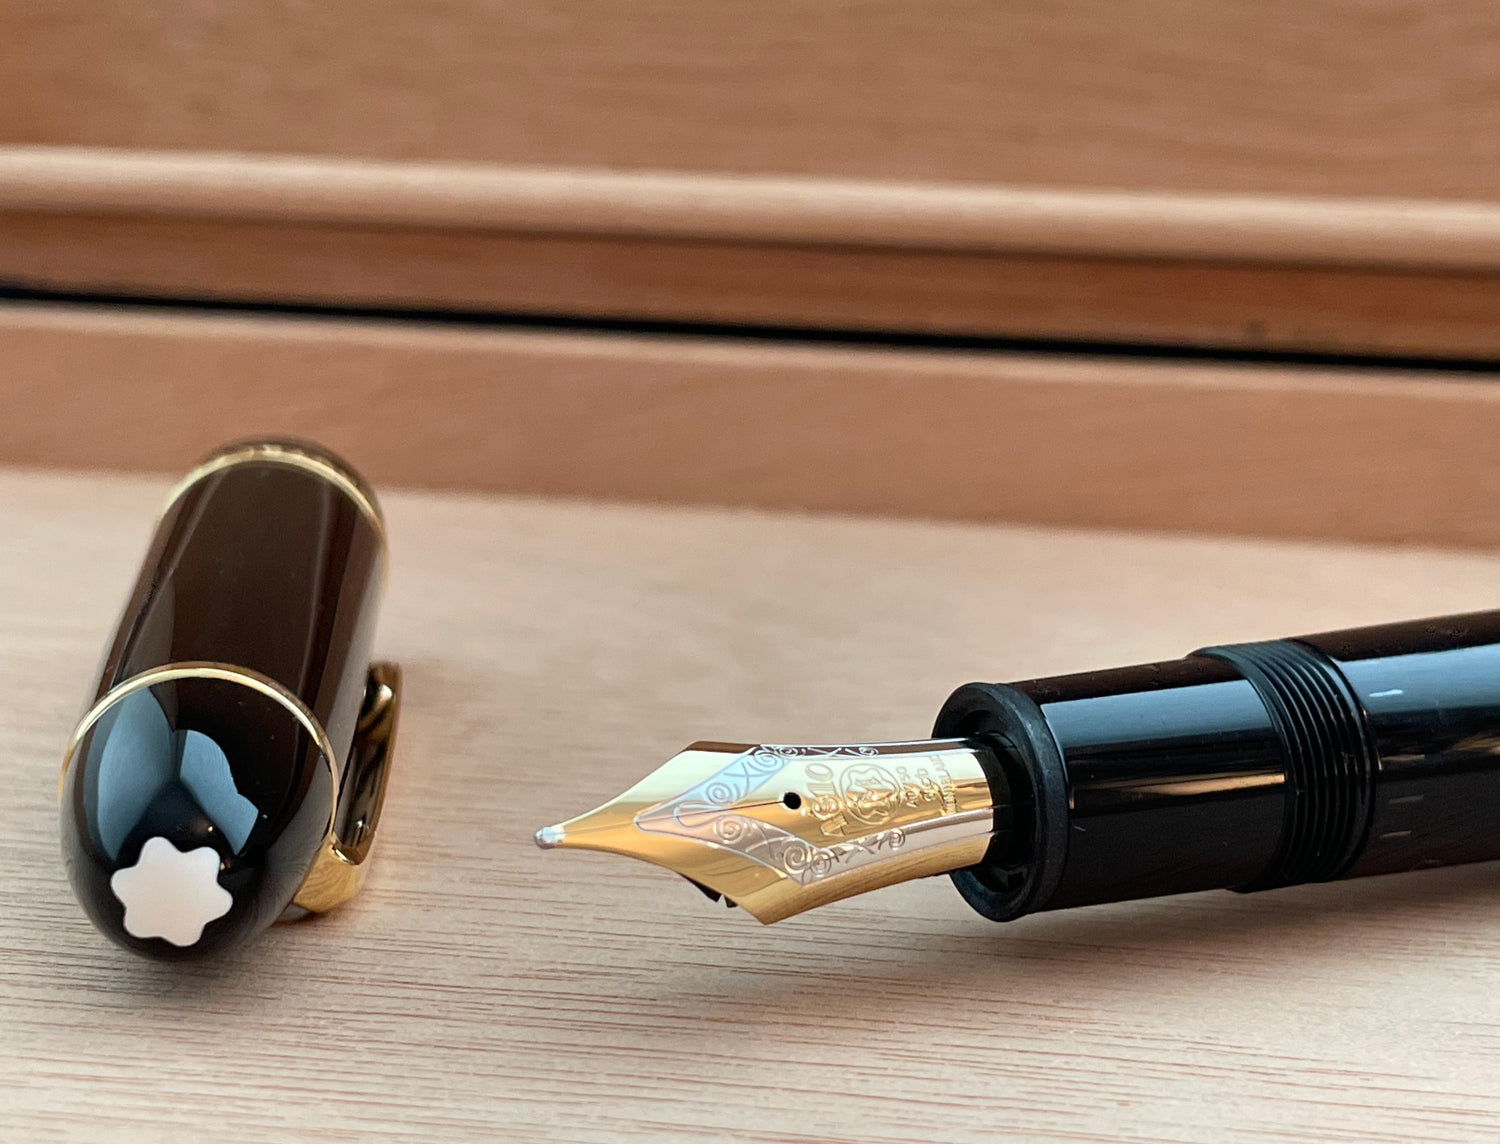 Sailor's New Limited Edition Anime-Inspired Pen - The Pen Company Blog